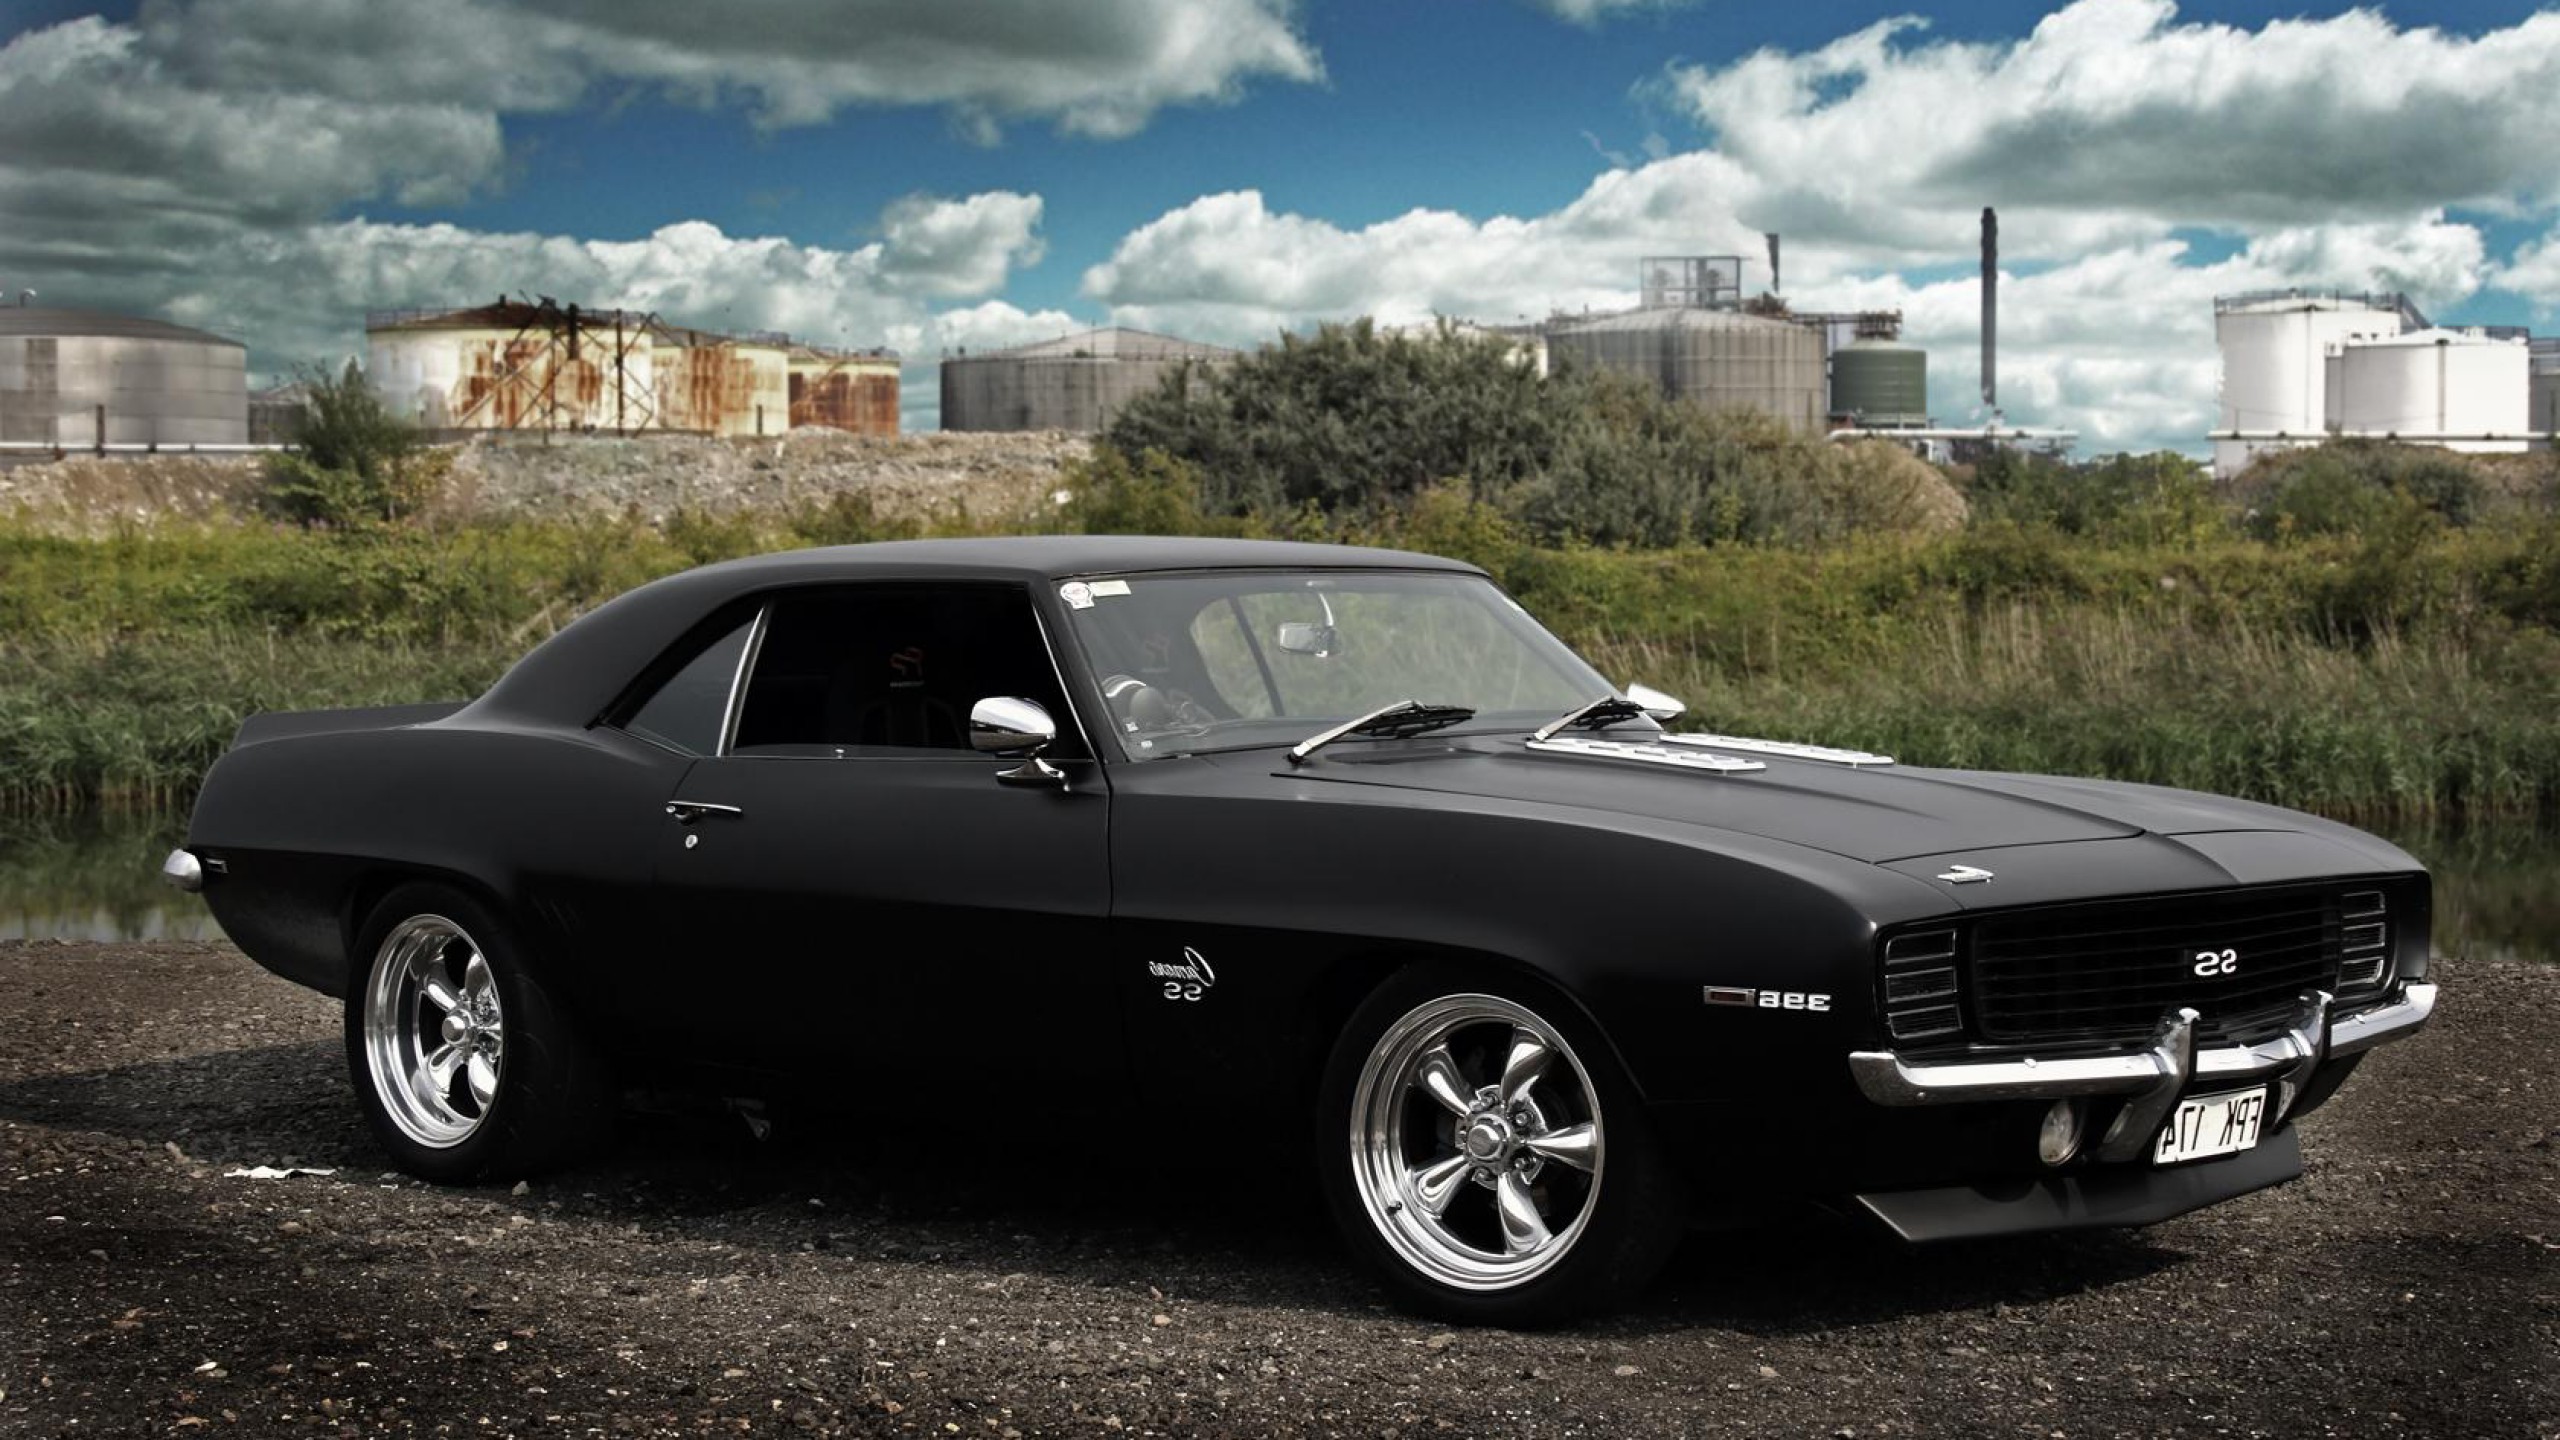 American Muscle Car Wallpaper Hd For Mobile